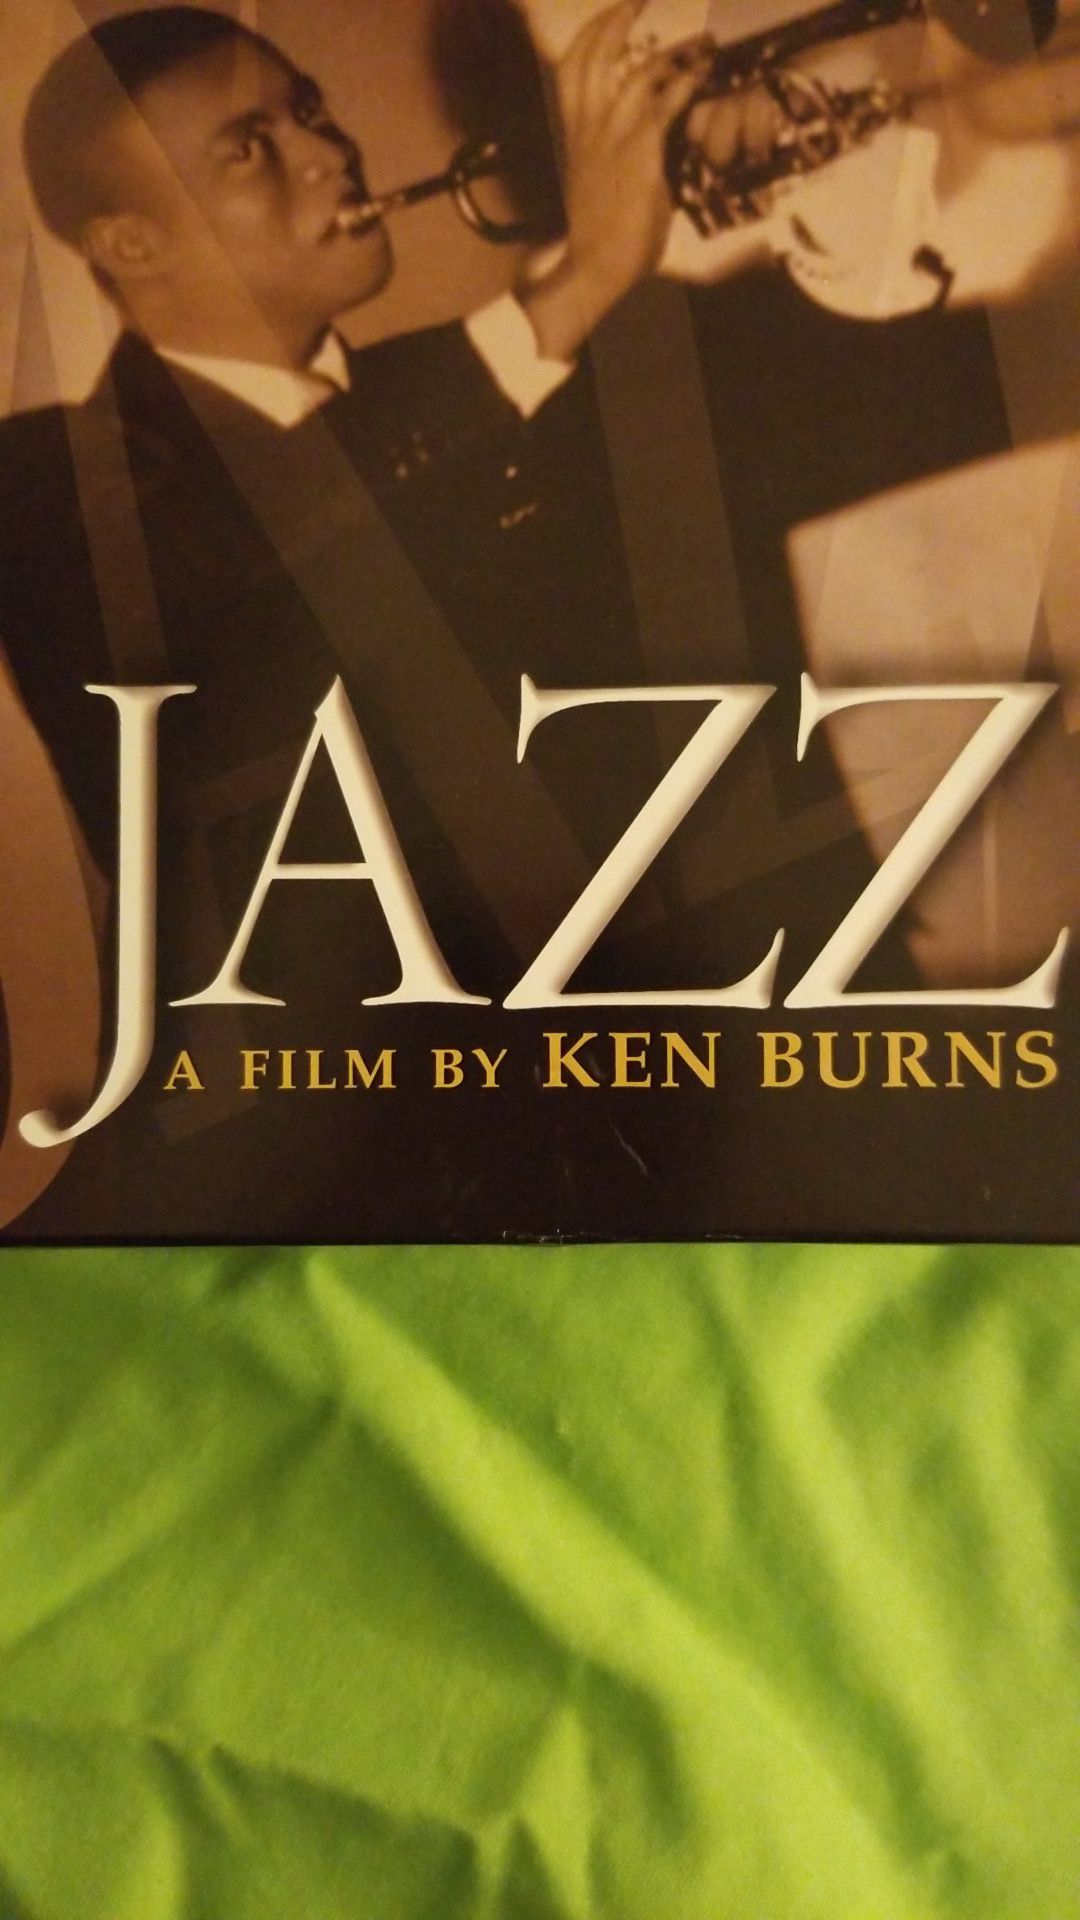 Jazz Lovers. DVD collection. Classic